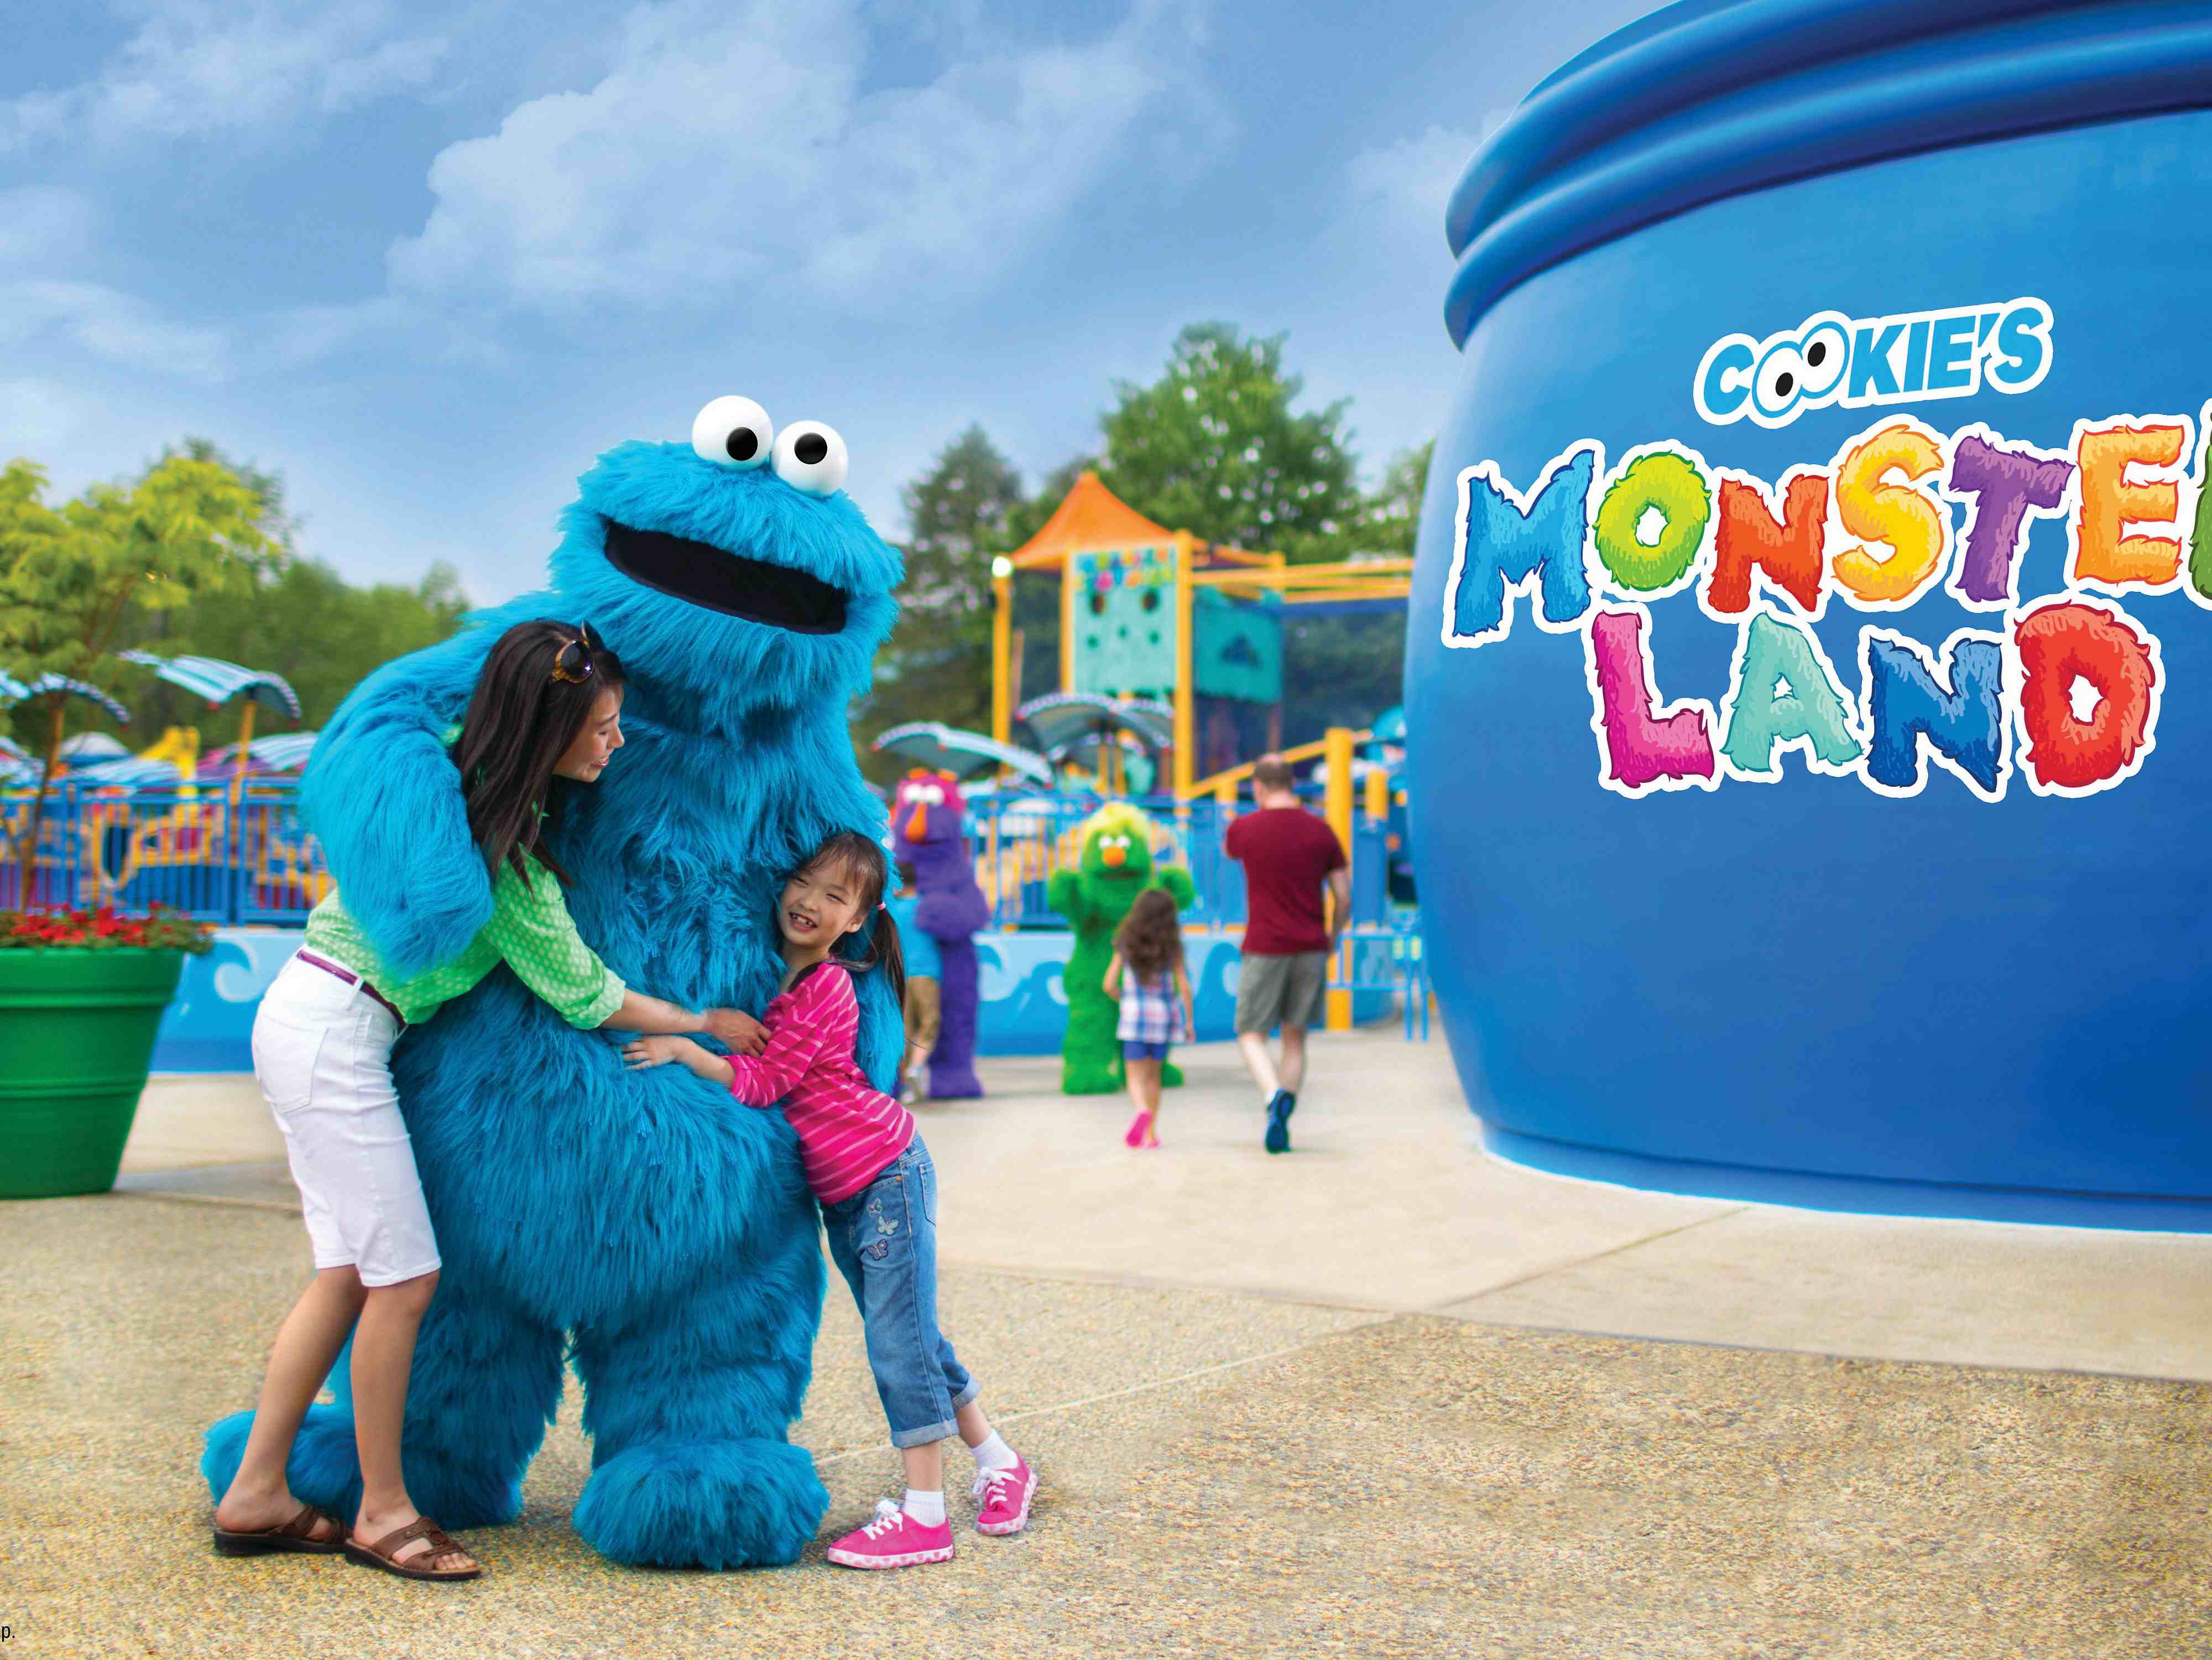 Cookie's Monster Land - 1 mile from the hotel